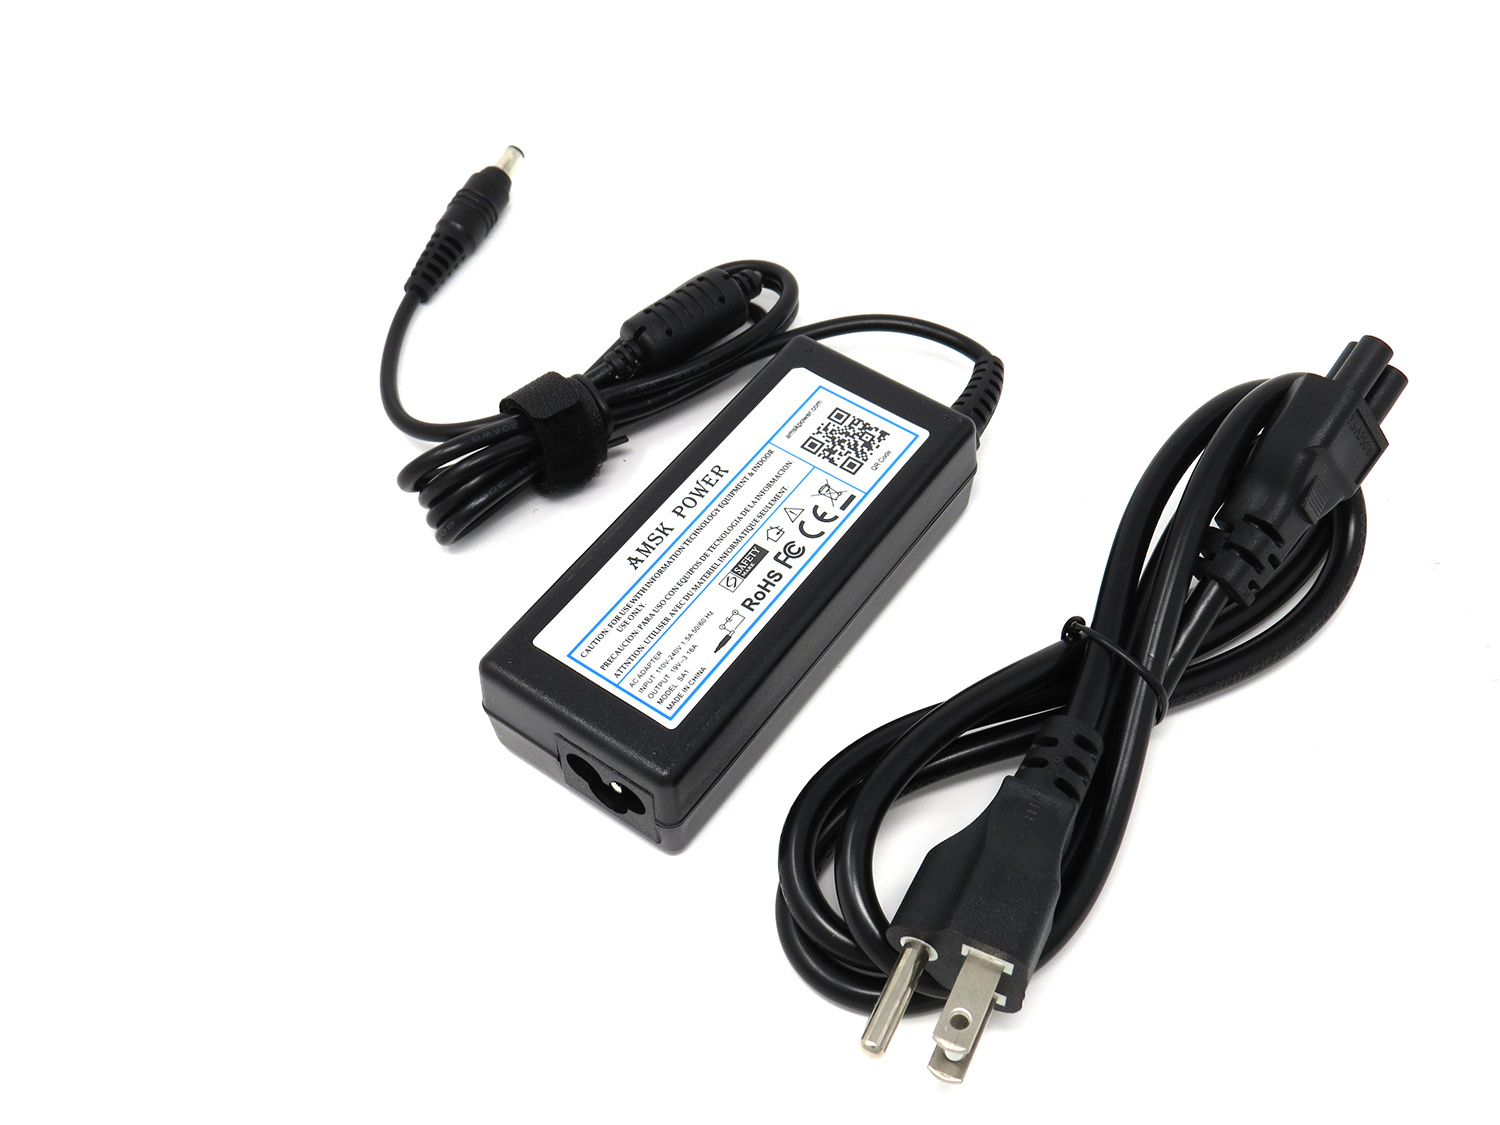 Ac Adapter for Samsung Sadp-90fh B Ad-9019s - image 1 of 3